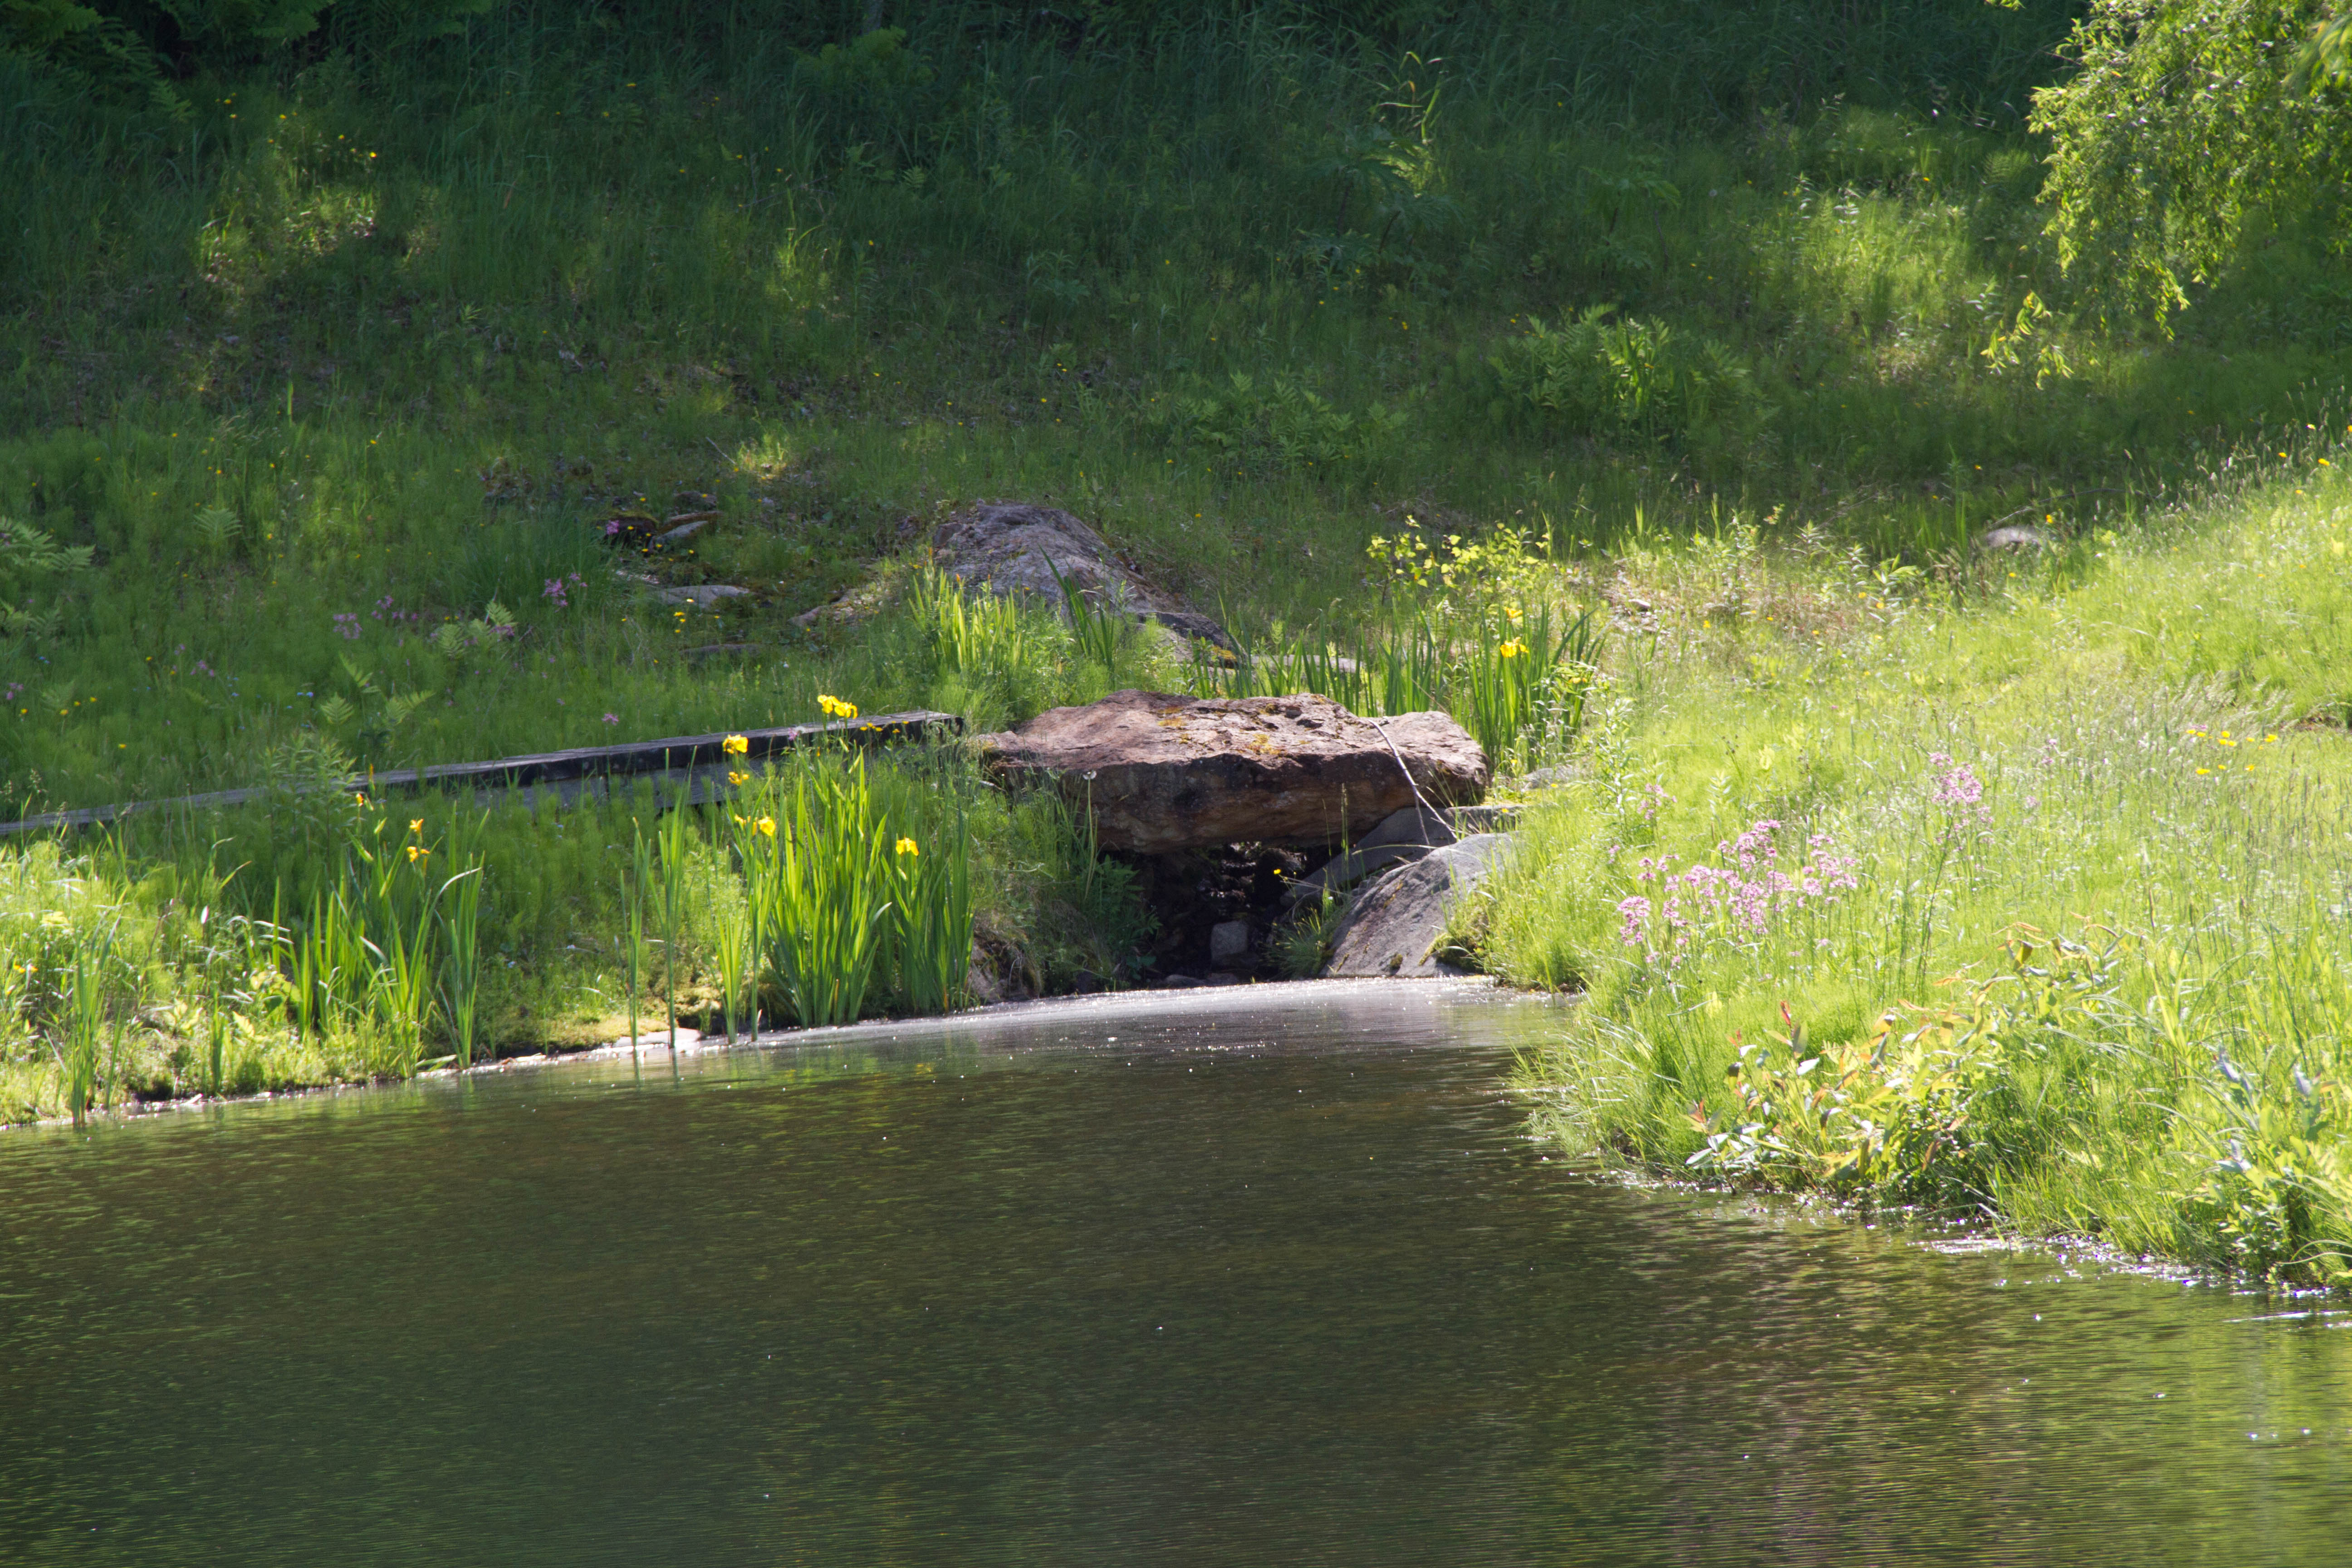 We uncovered this rock when we dug the pond. My friend Myke suggested that it become a bridge.